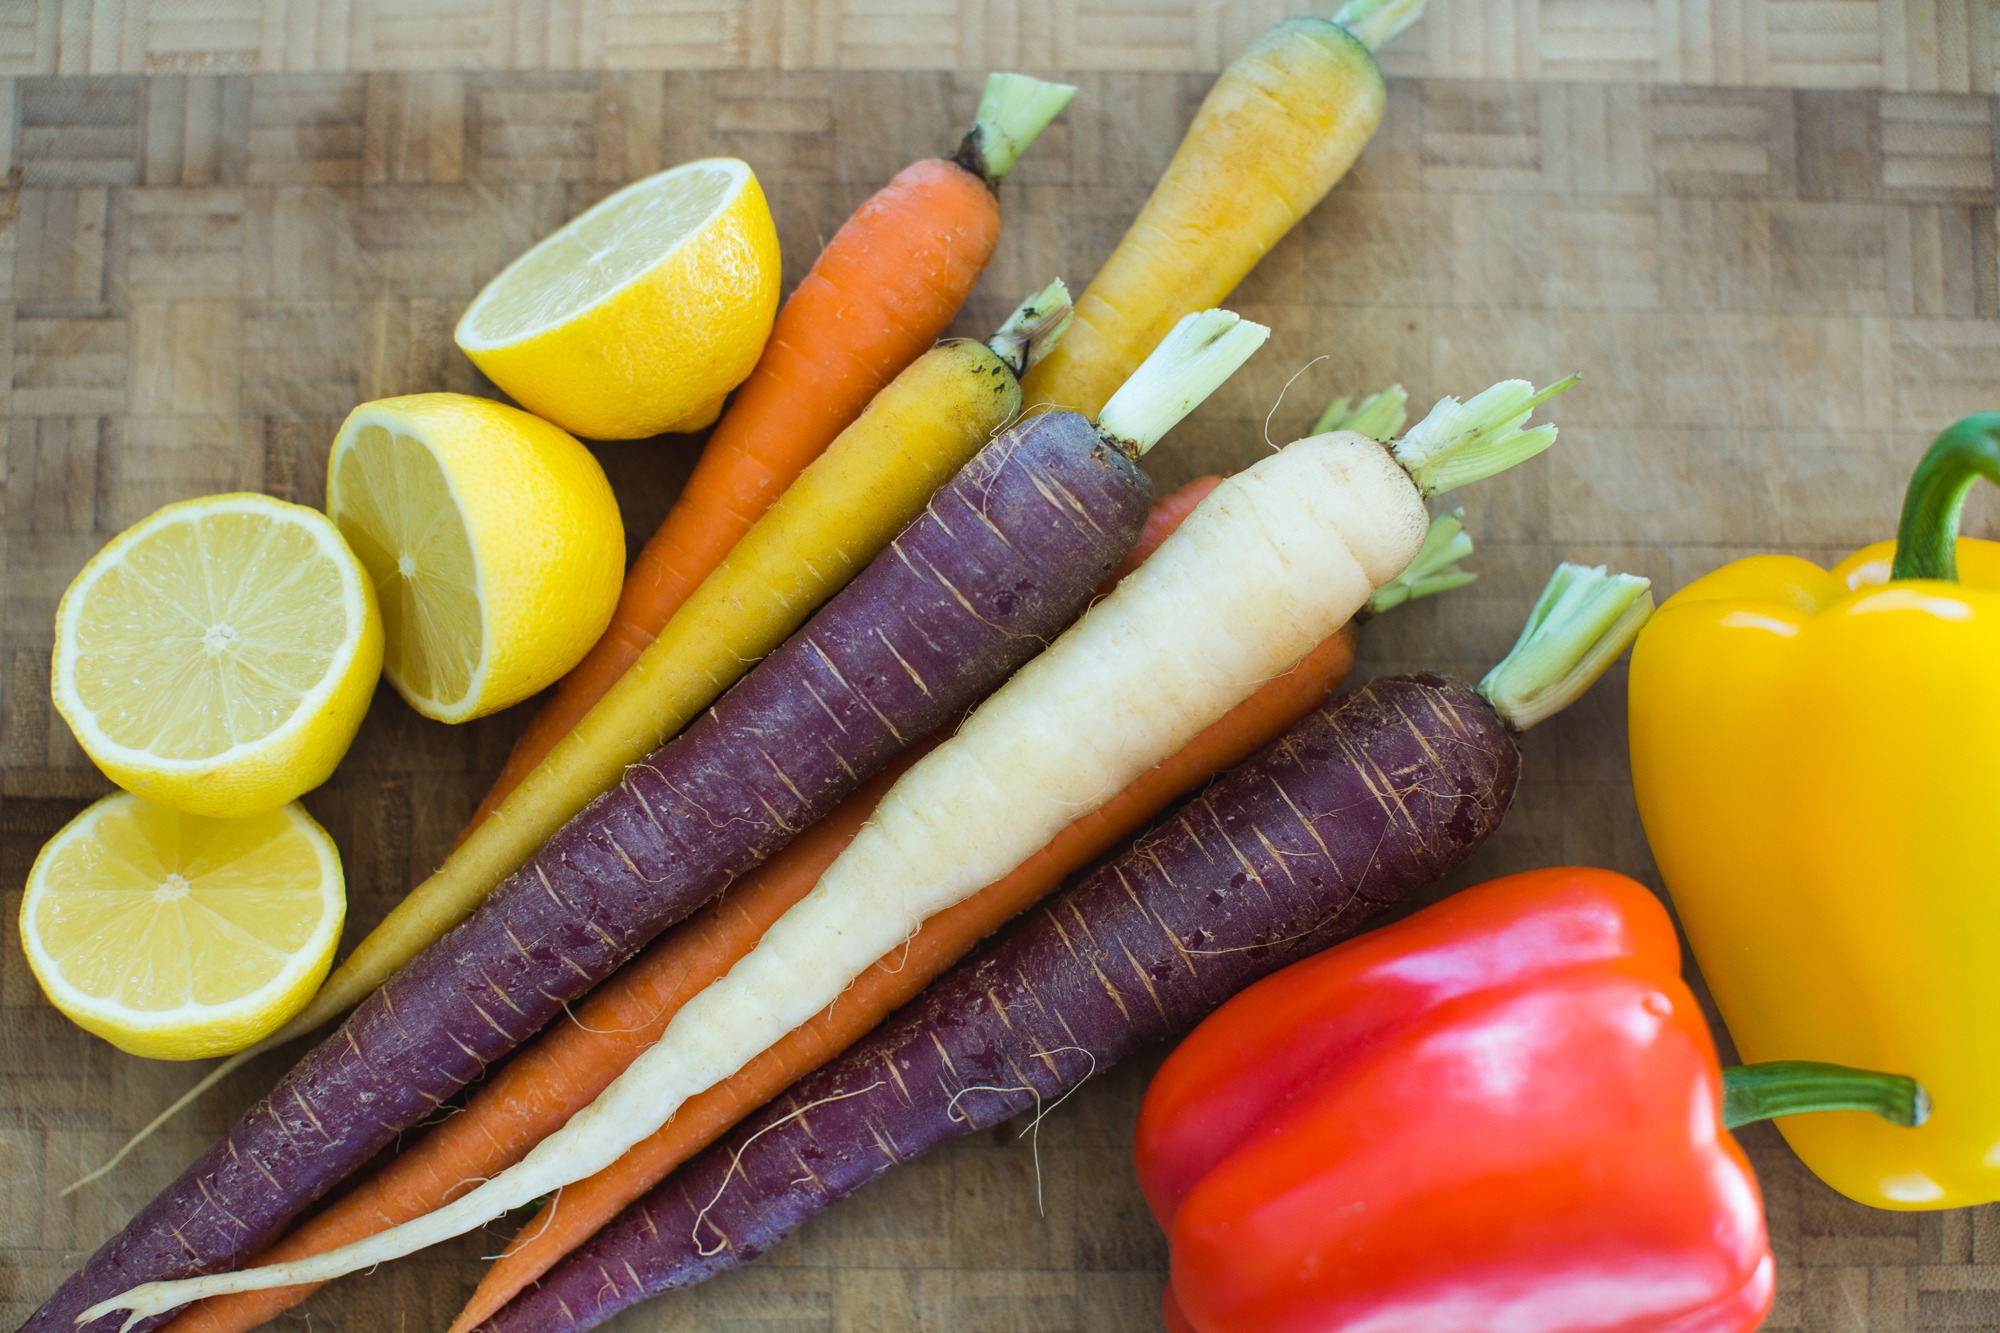 photos of carrots, bell peppers, and lemons